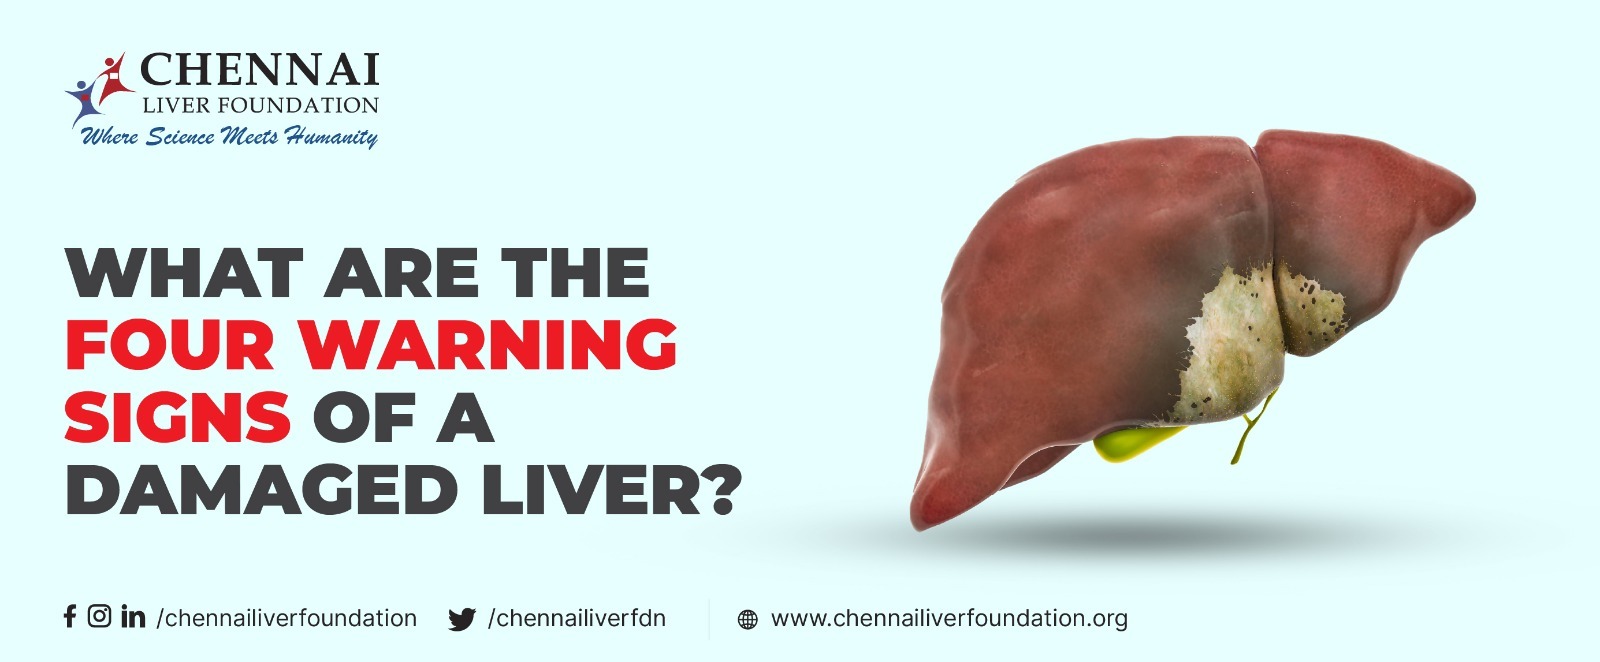 What Are The Four Warning Signs of a Damaged Liver